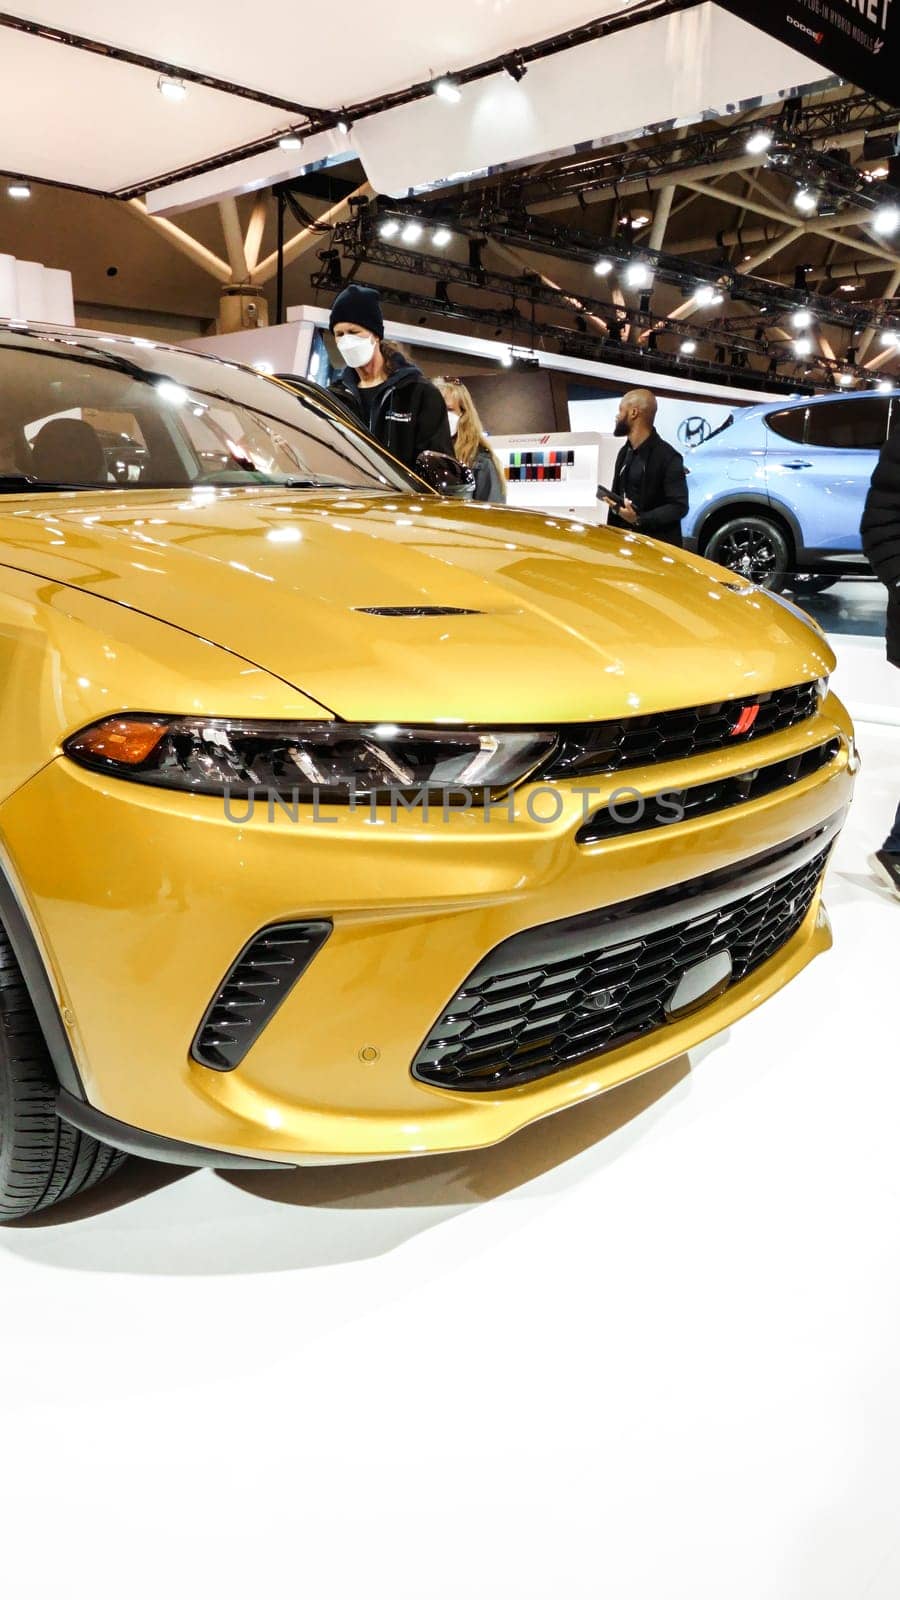 Close up view of yellow dodge GT car on display. Vertical. Crowds looking at new car models at Auto show. National Canadian Auto Show with many car brands. Toronto ON Canada Feb 19, 2023